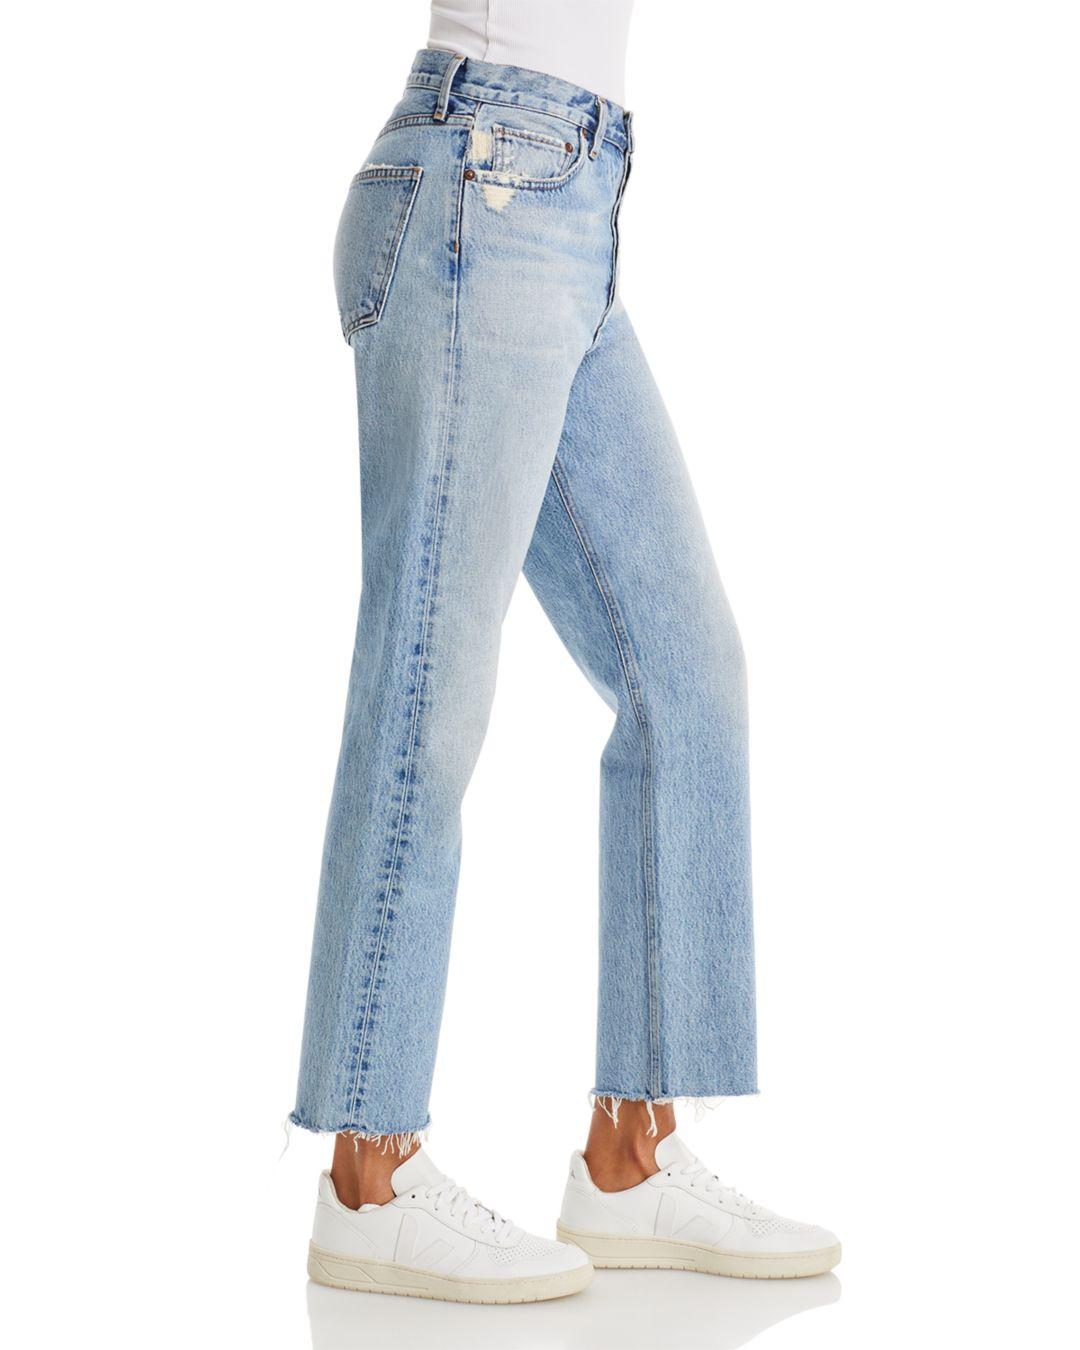 Bloomingdales Women Clothing Jeans High Waisted Jeans 90s Pinch Waist High Rise Cropped Straight Jeans in Ruminate 